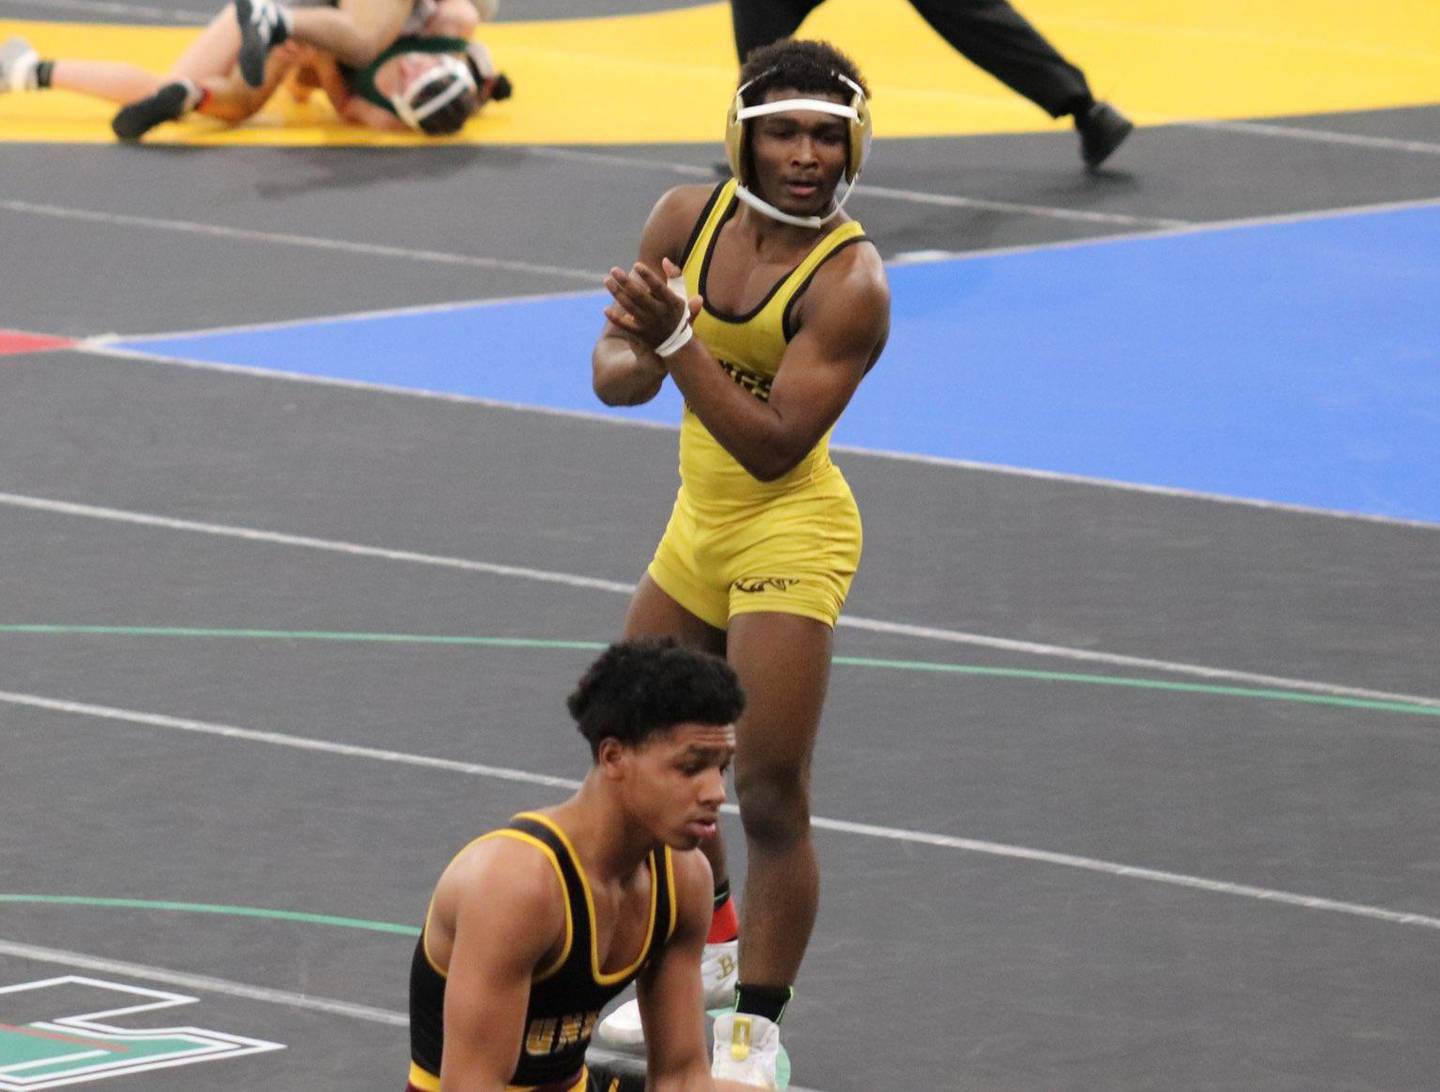 Amondre Wooden (standing) gained revenge with a 5-1 decision over Dunbar's Cameron Deville (kneeling) to earn third place at the Class 2A-1A state tournament as a 132-pound freshman a week after having lost to Deville, 13-5, in their Class 2A-1A North Regional title bout.